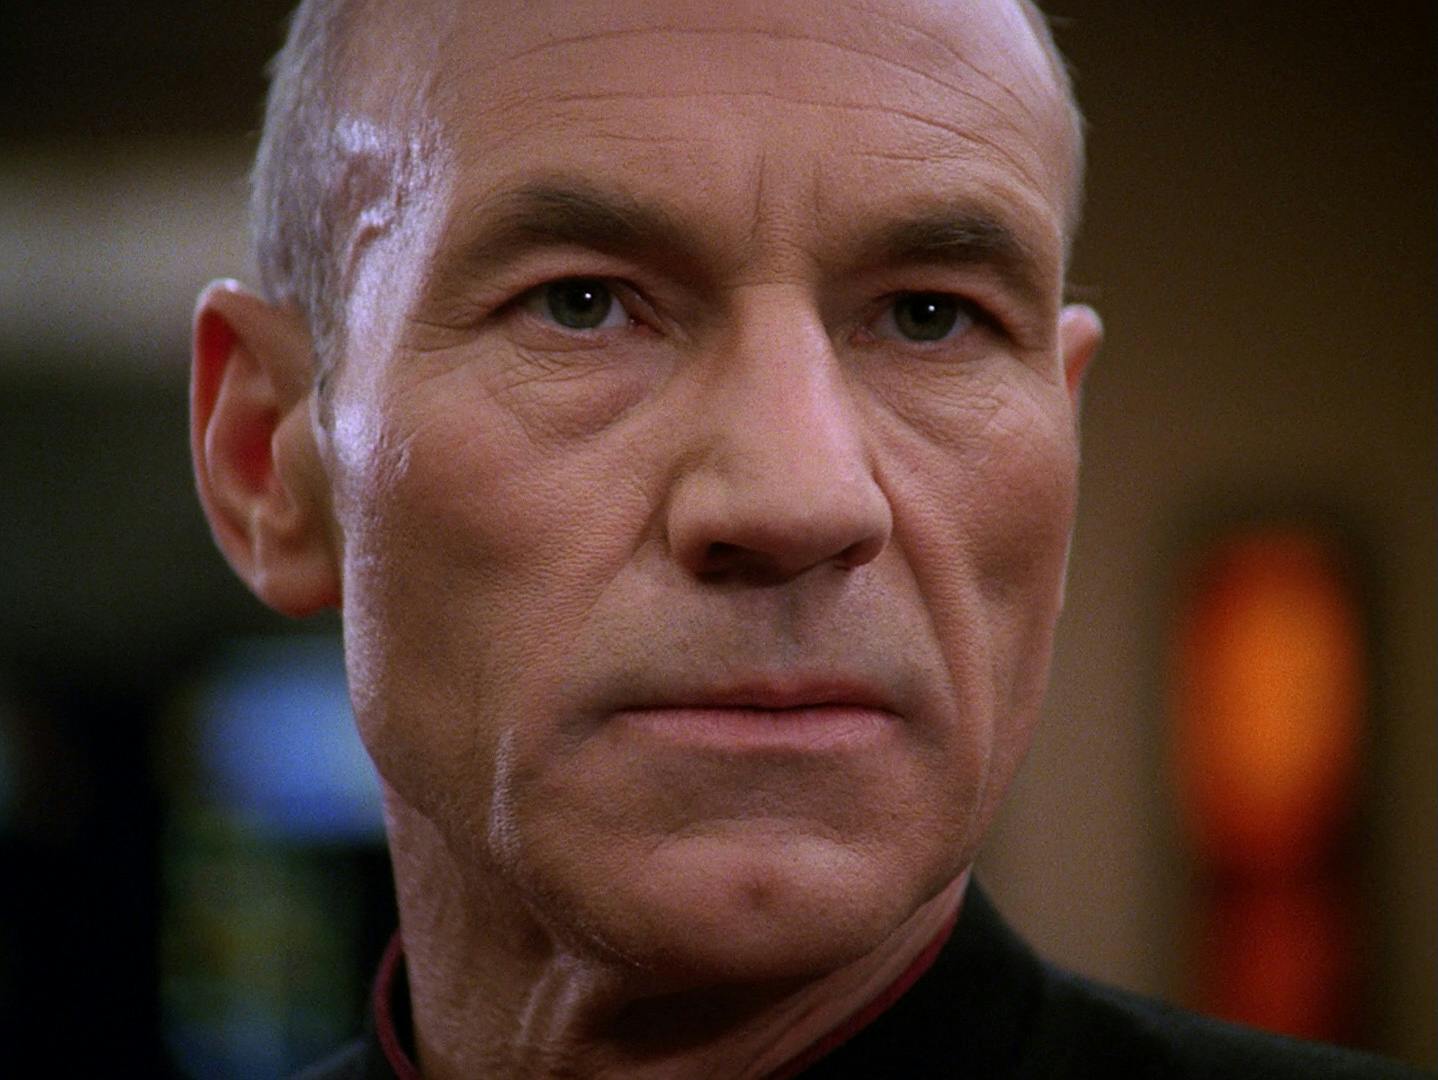 Close-up of Jean-Luc Picard who stands and sternly assesses the threat on the viewscreen in front of him in 'The Best of Both Worlds, Part I'